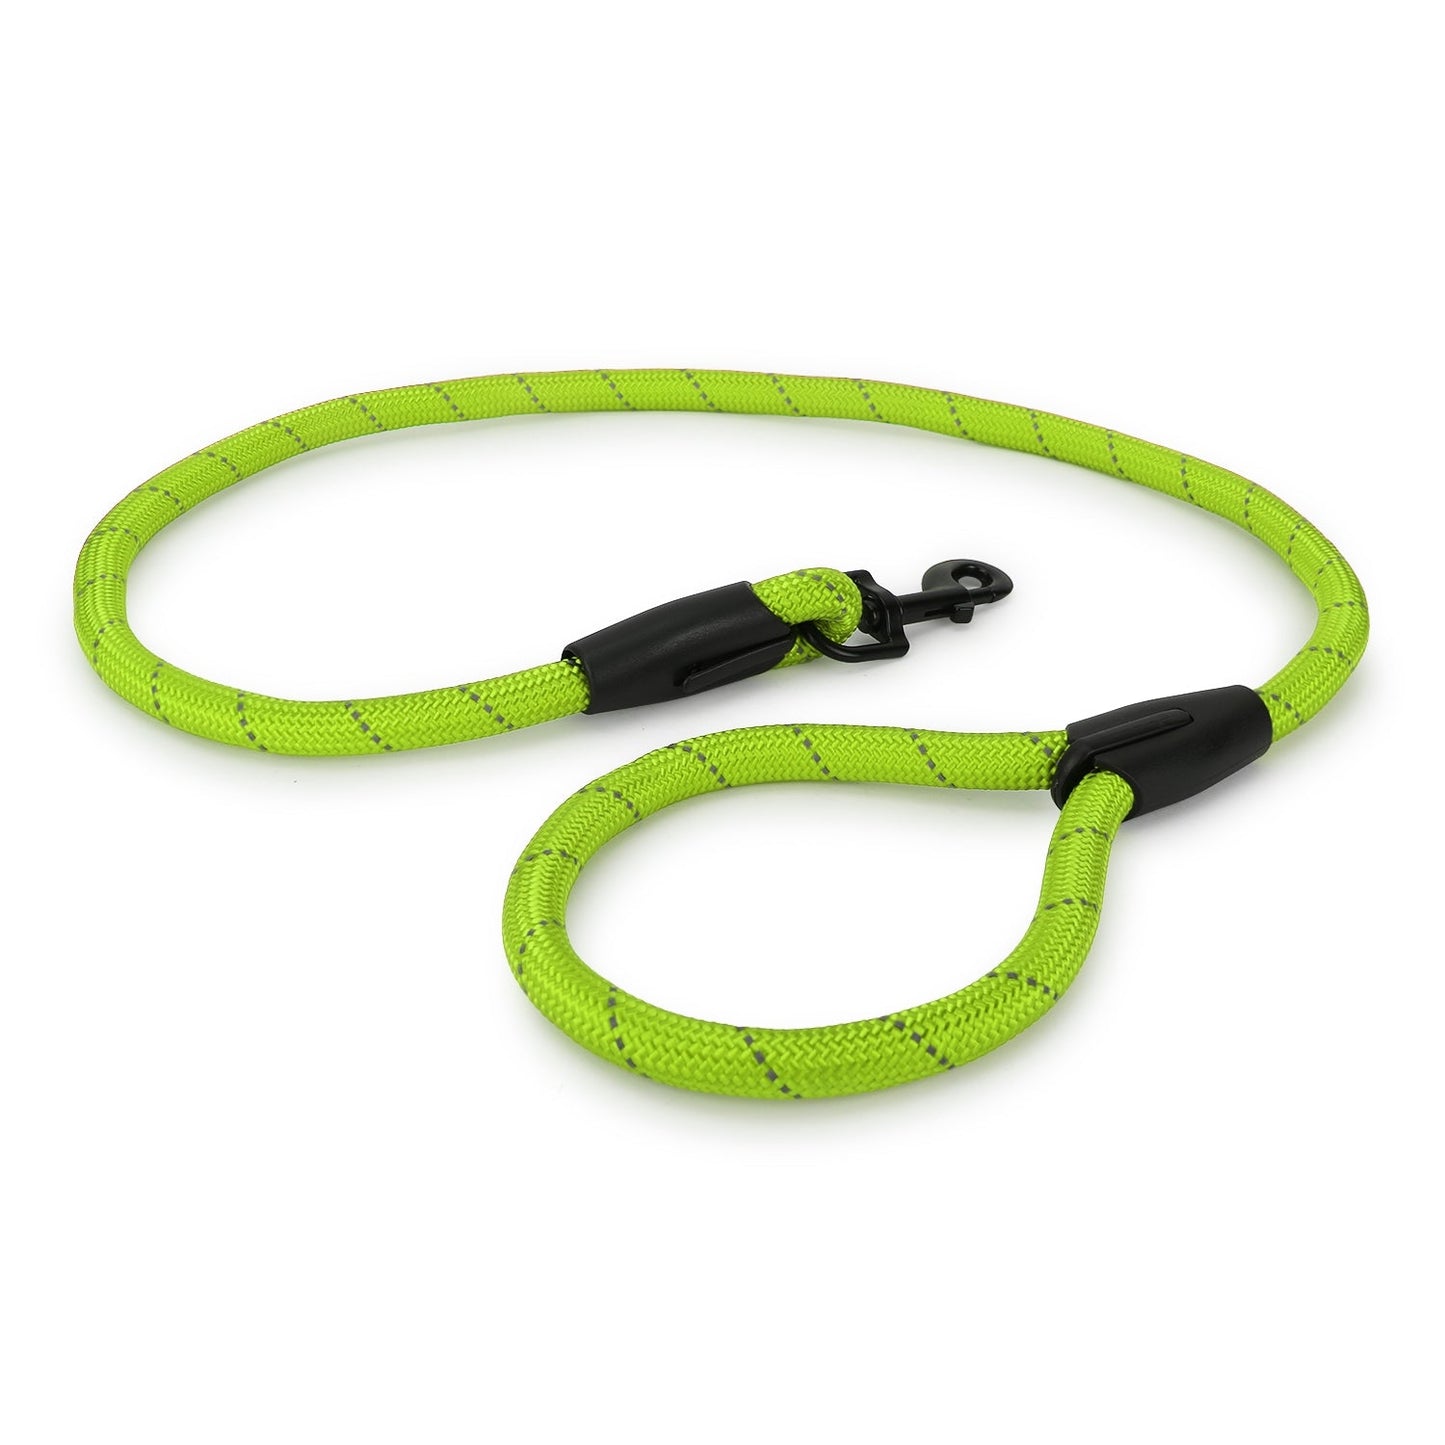 Basil Rope Leash for Dogs, 4 Feet (Solid Green)